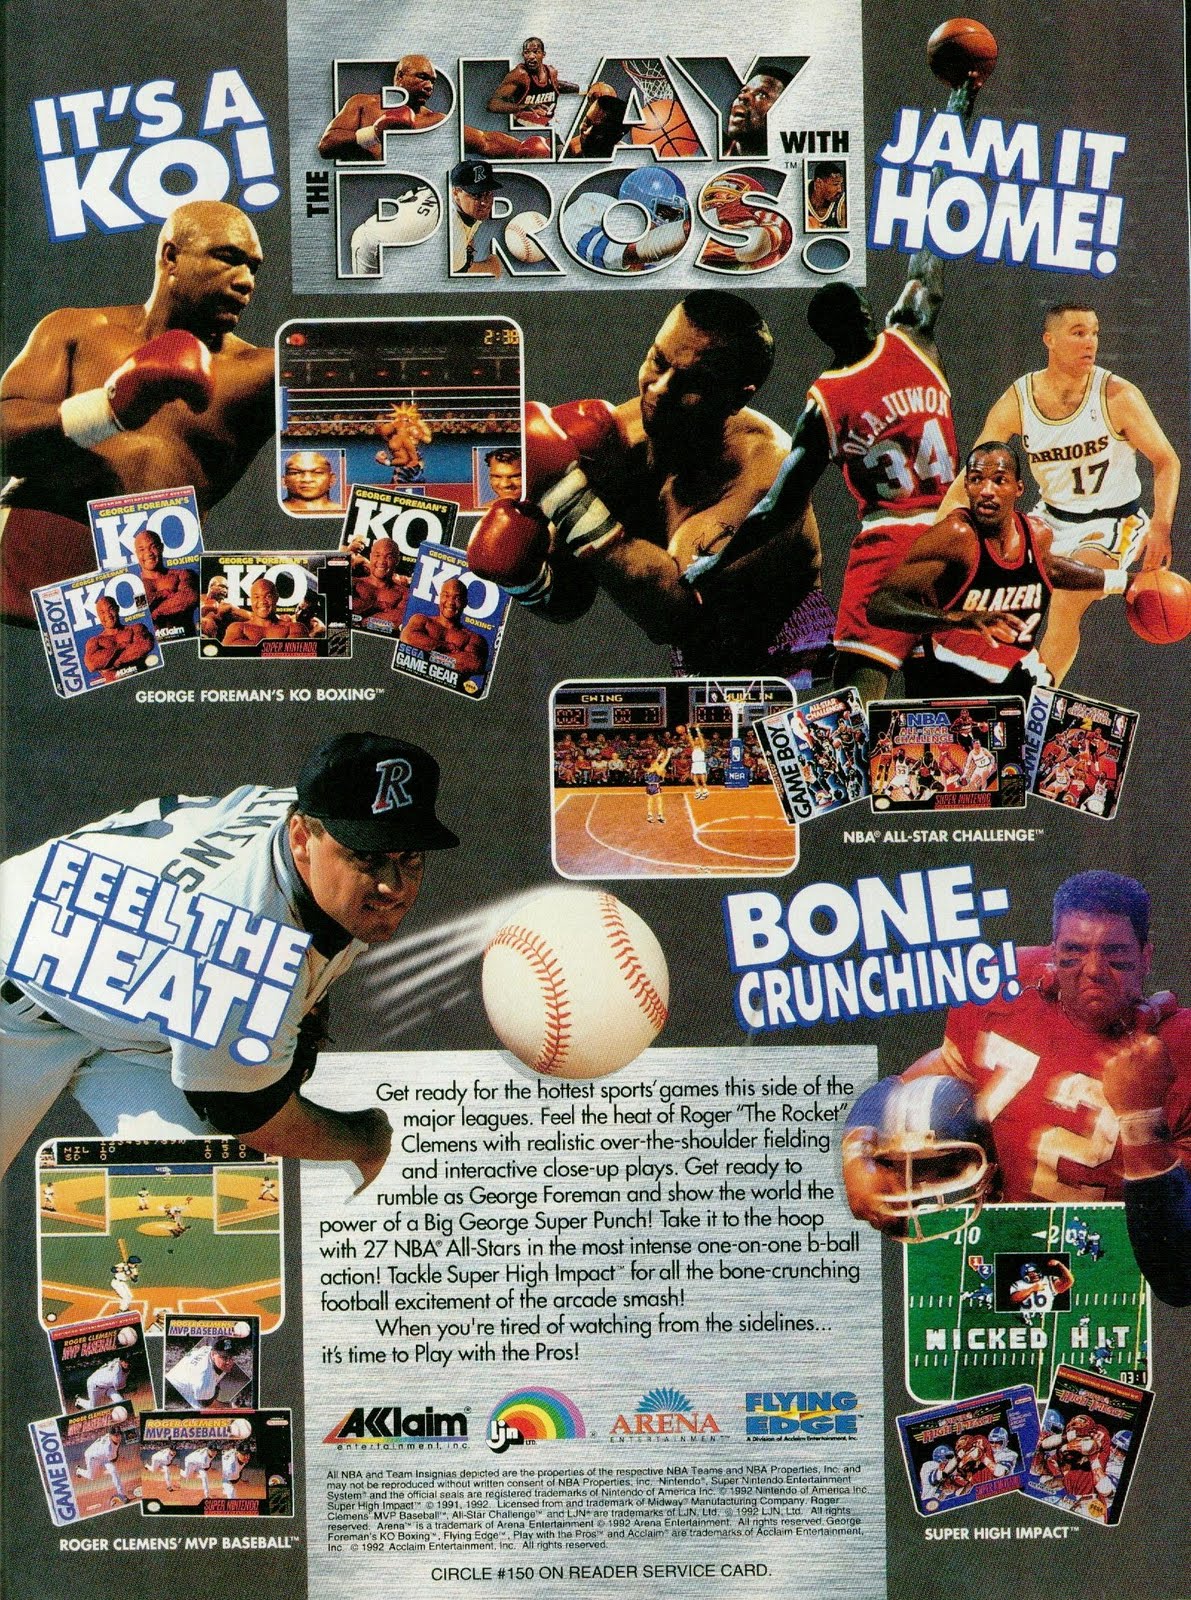 vintage gaming ads - acclaim sports games - It'S A Sa P Yjam With Jam It Home Balance Efelthe Bone Crunching! Or Get ready for the hotted sports game of the malaguer Fotball Roger The Rocket Clermons with redat cor the shoulder Beding and interactive clow